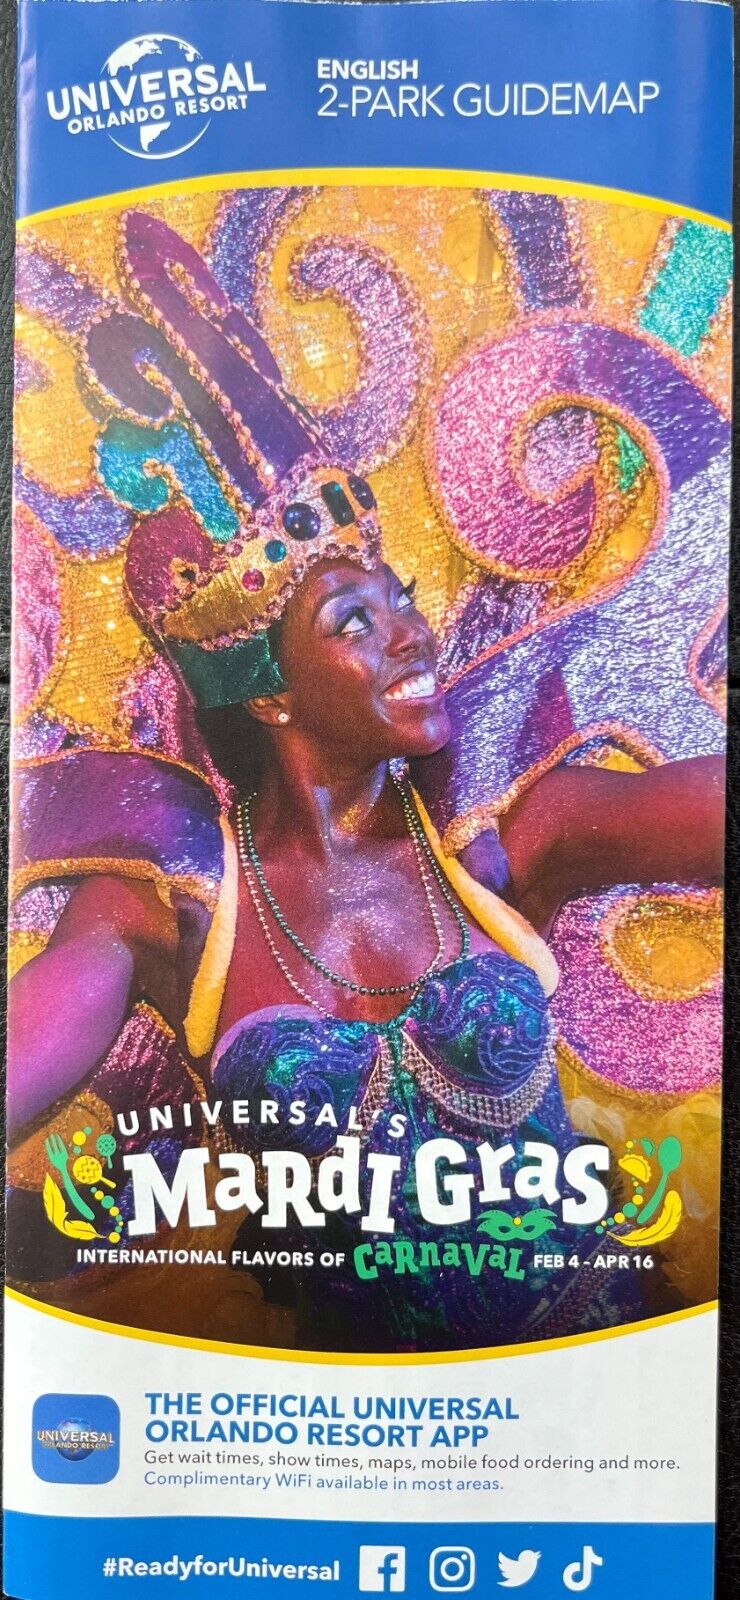 NEW OFFICIAL  2023 Universal Orlando resort 2 Park Guide Map. Plan your Trip 